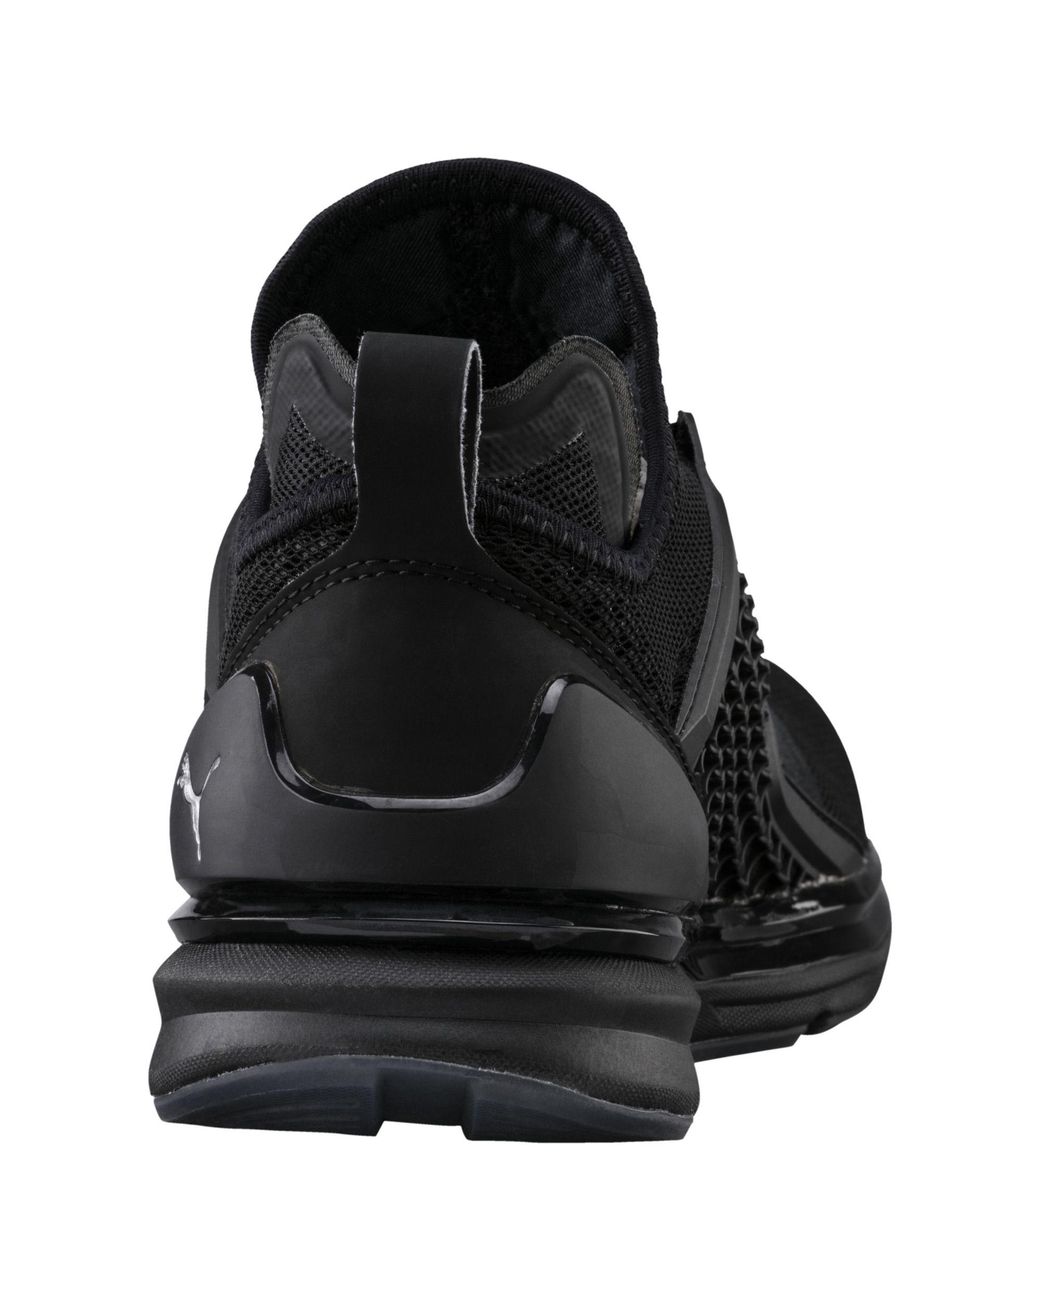 PUMA Rubber Ignite Limitless Women's Training Shoes in Black | Lyst